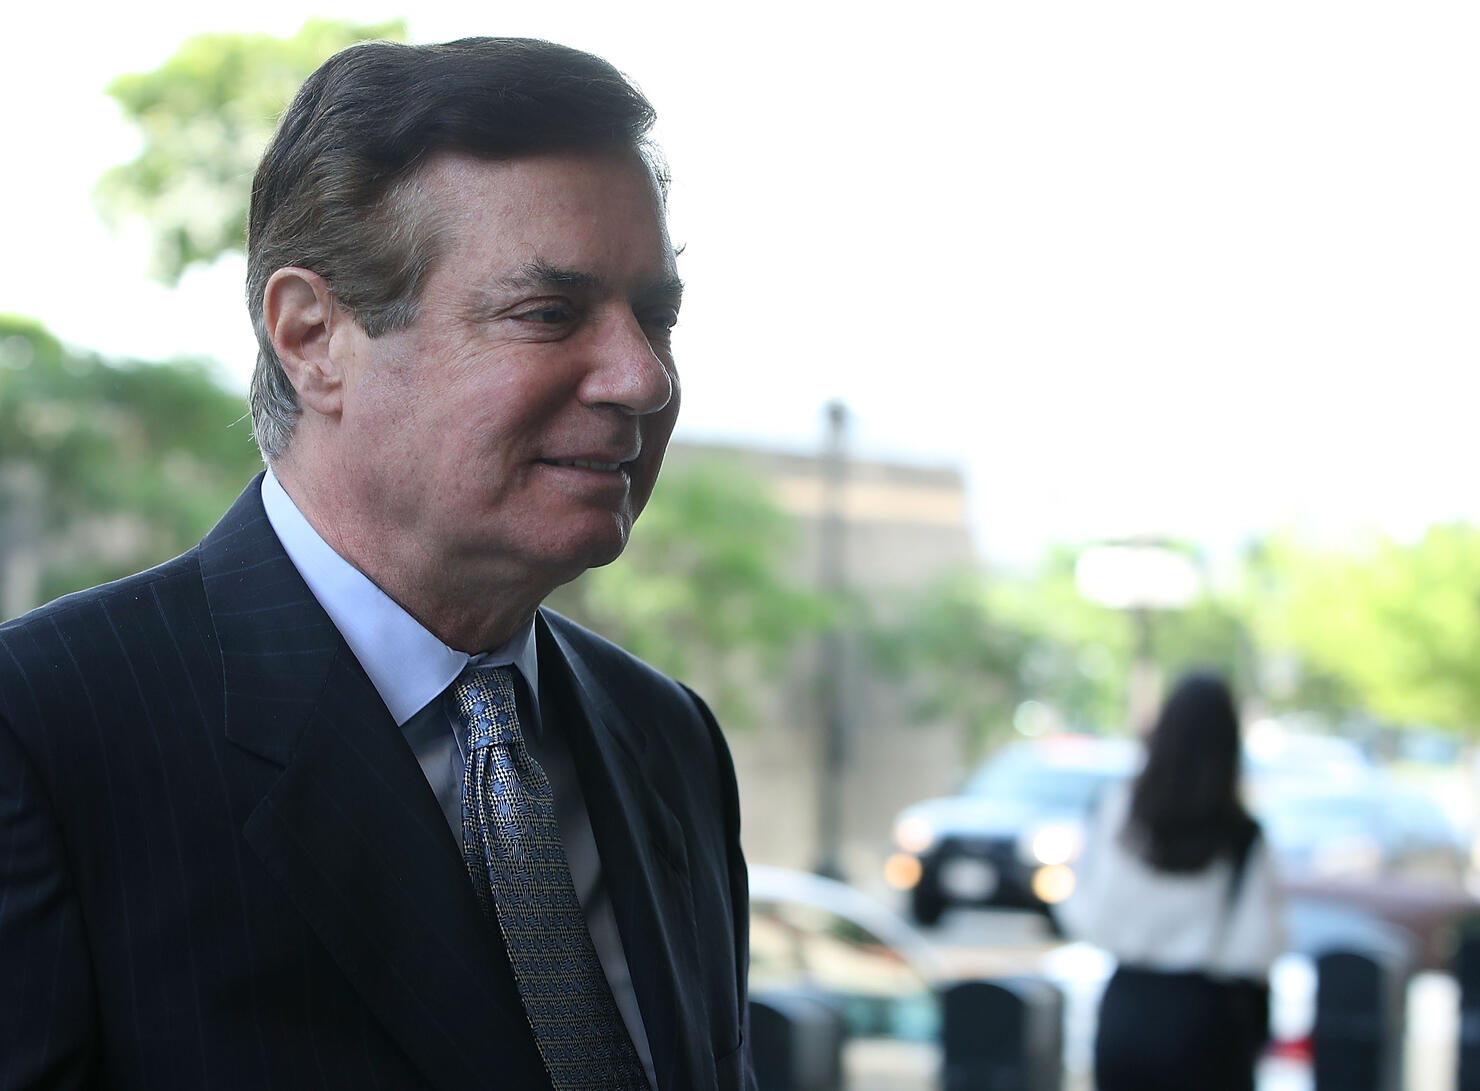 Paul Manafort accused of witness tampering by Special Counsel Robert Mueller